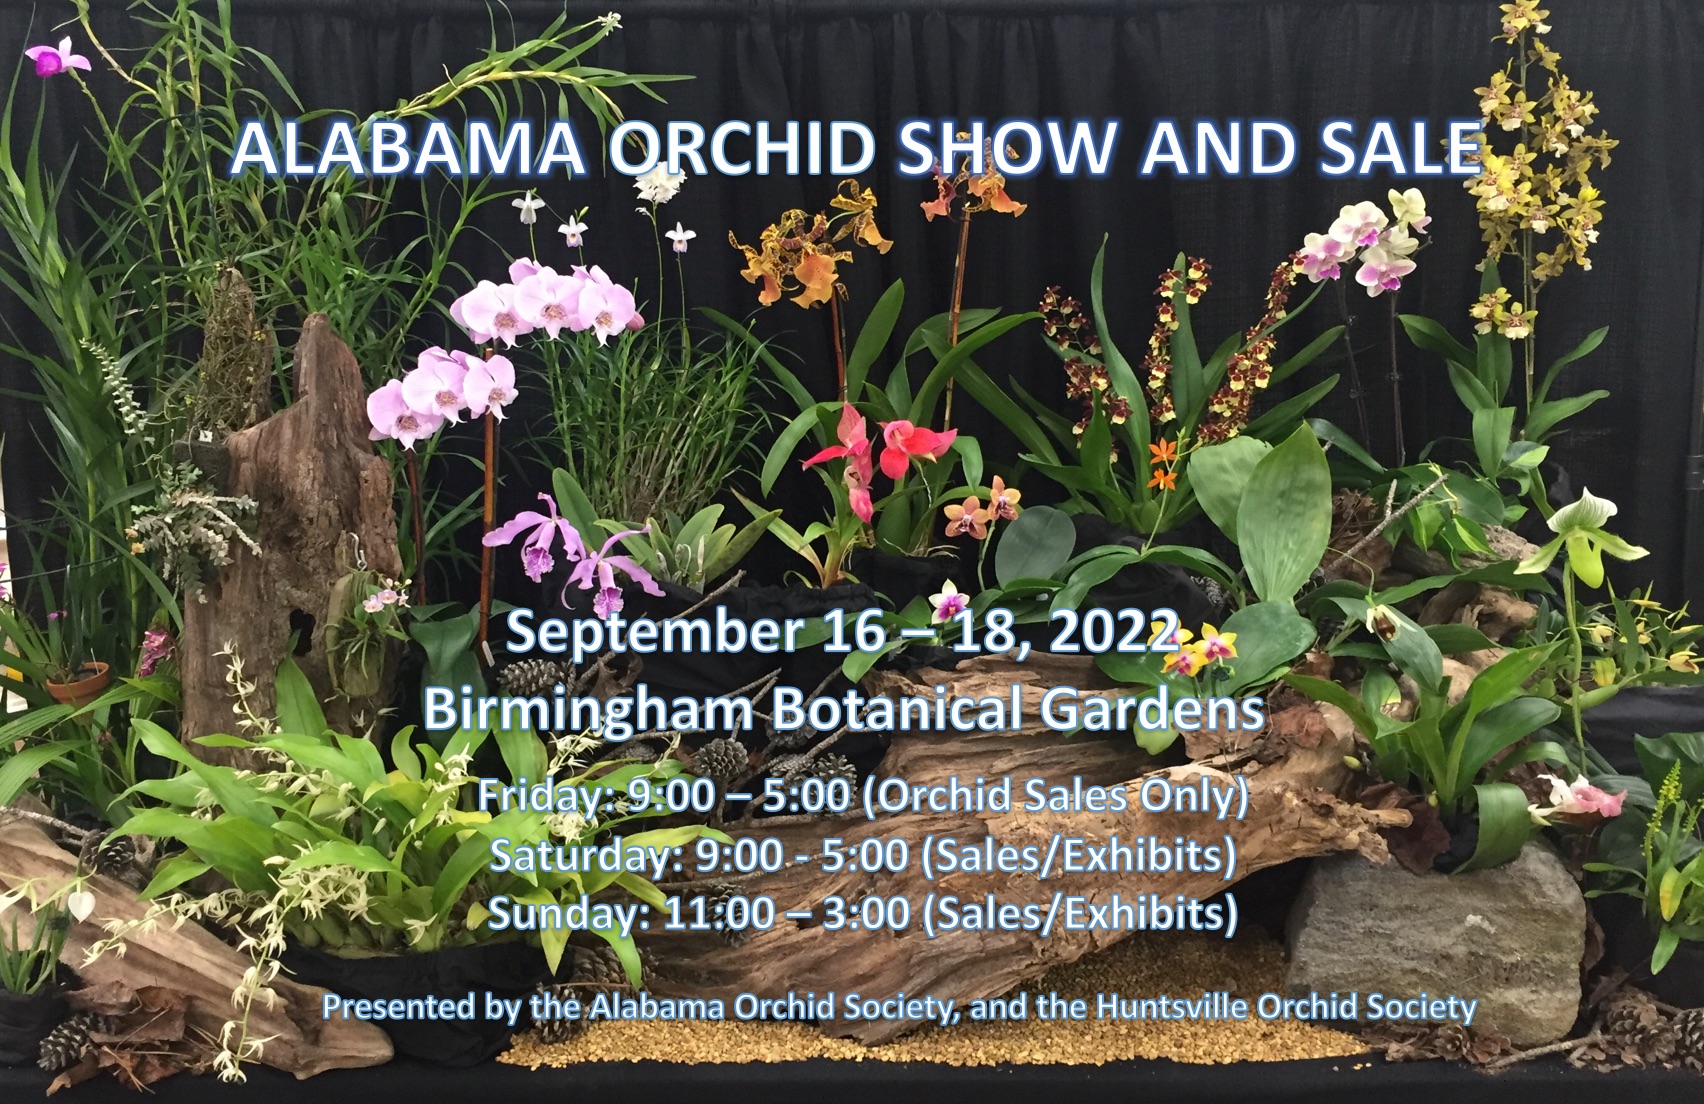 The Alabama Orchid Show and Sale